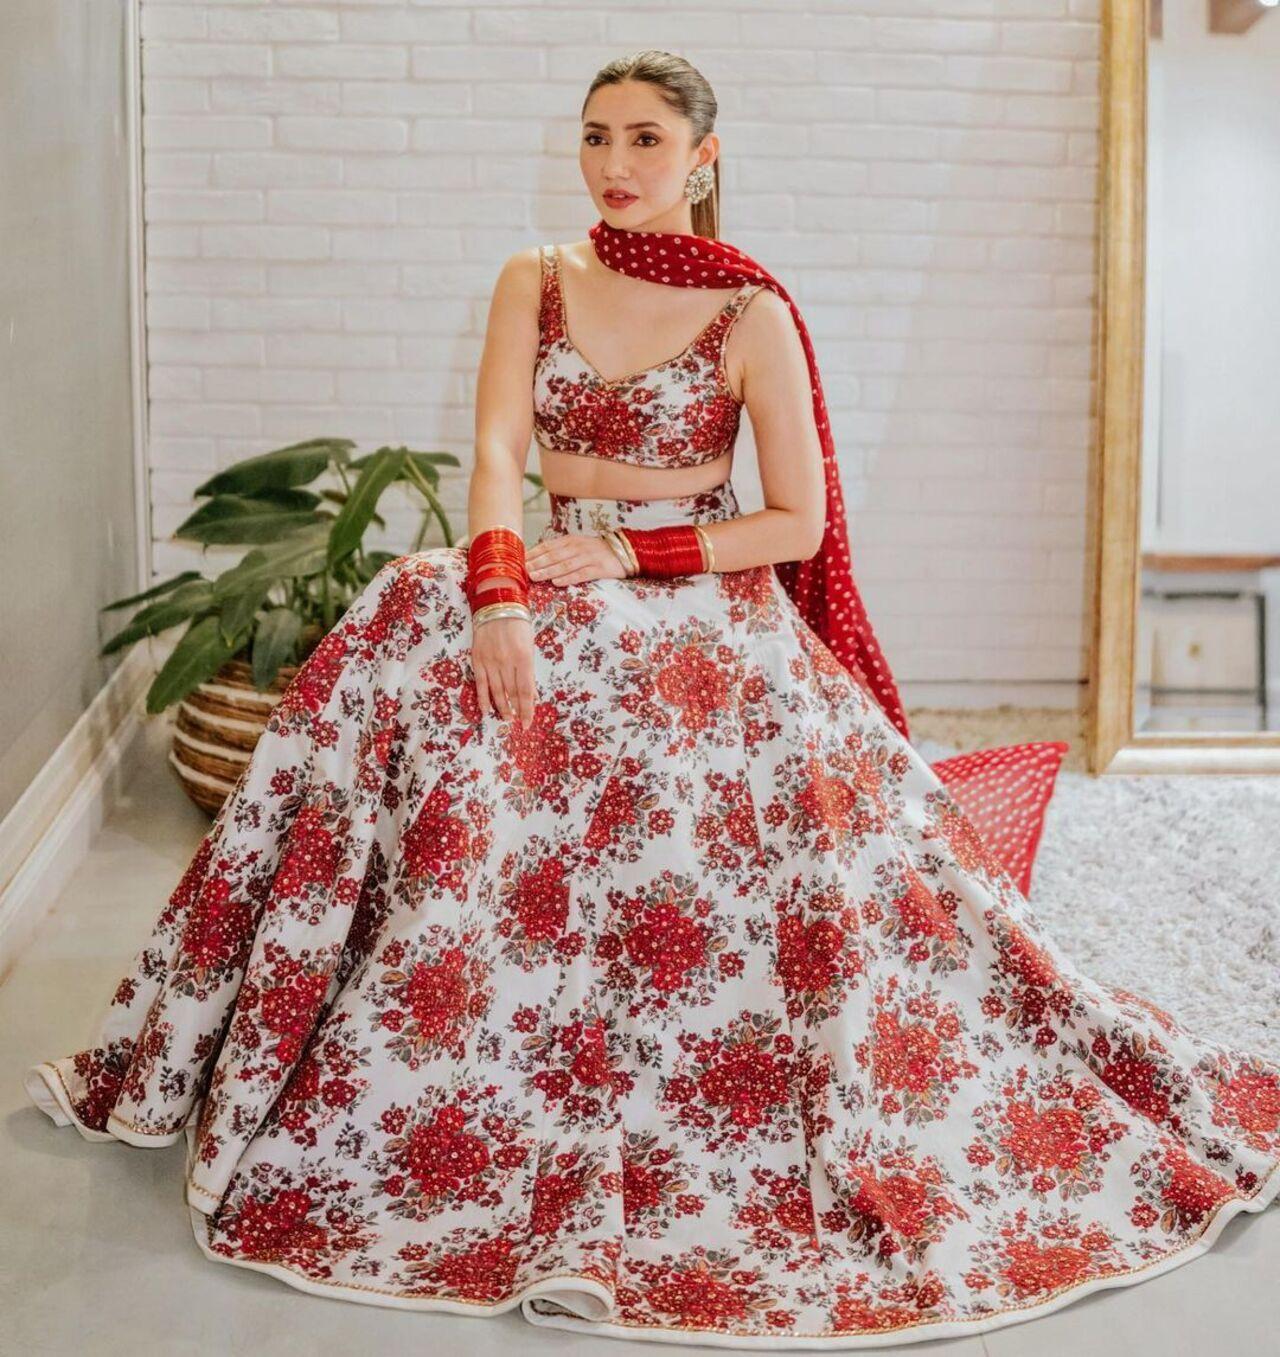 For her sangeet, Mahira brought in colours with her white lehenga covered in red floral prints. The red matched the blush on her face as she joyously celebrated her big day with her husband and loved ones